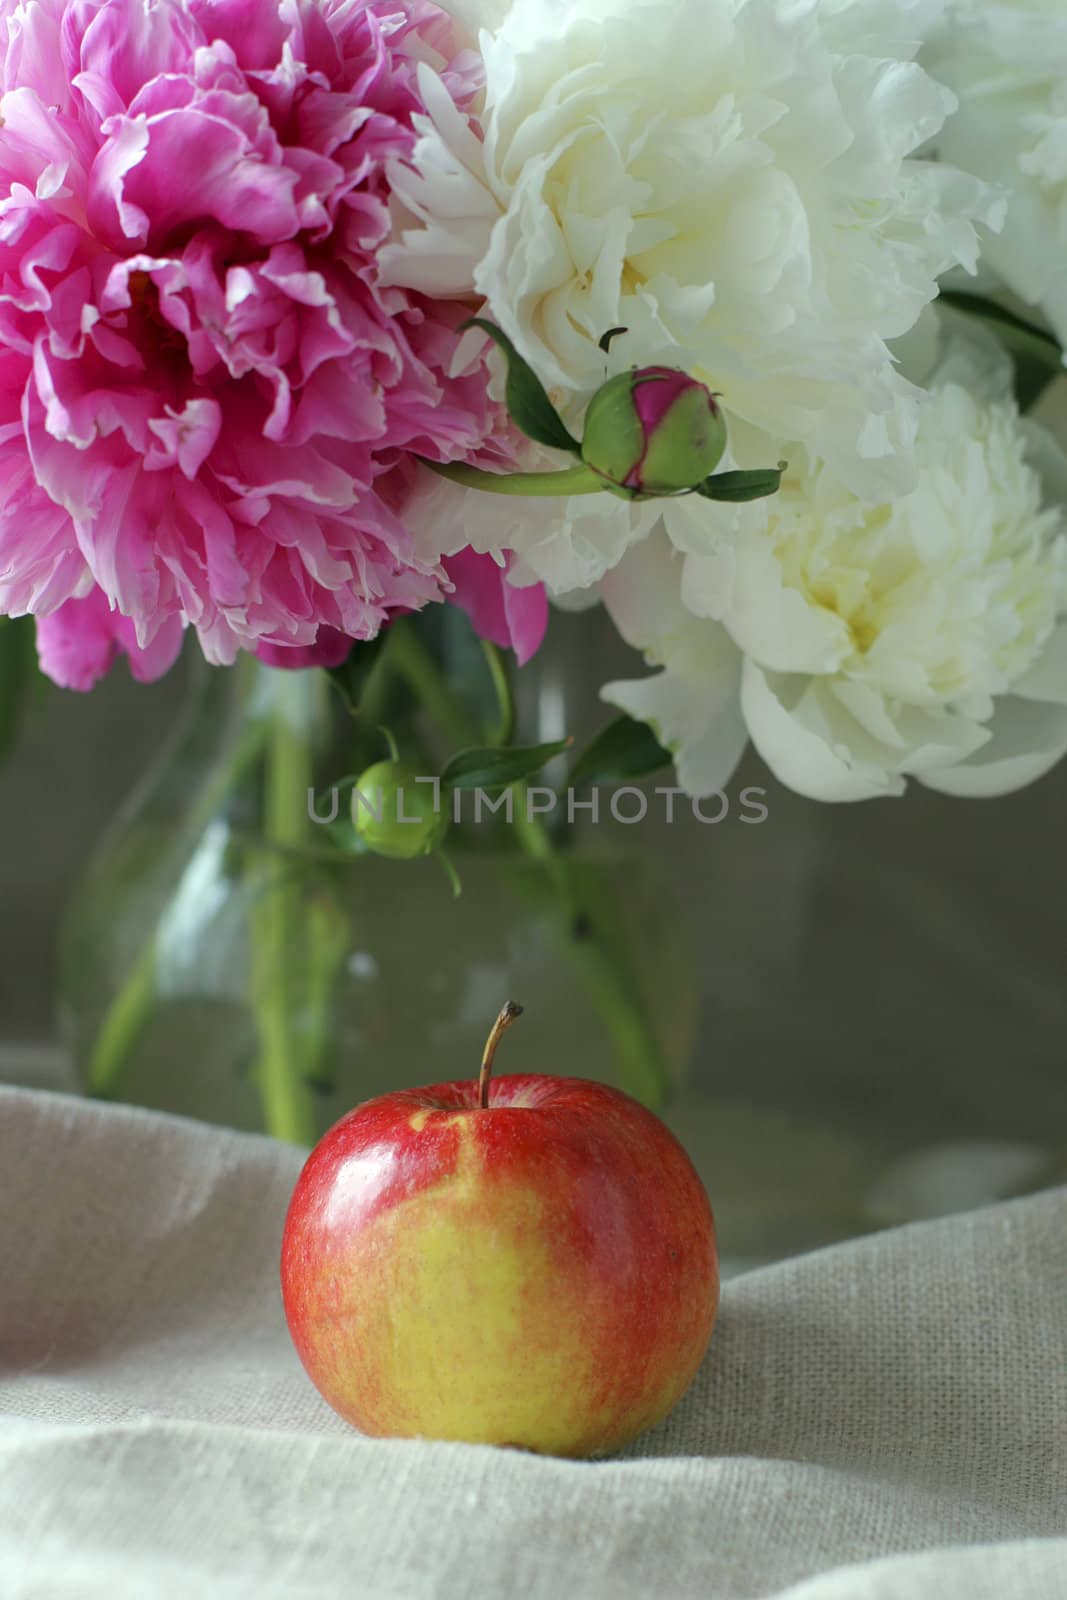 Flowers and apple by AlexKhrom